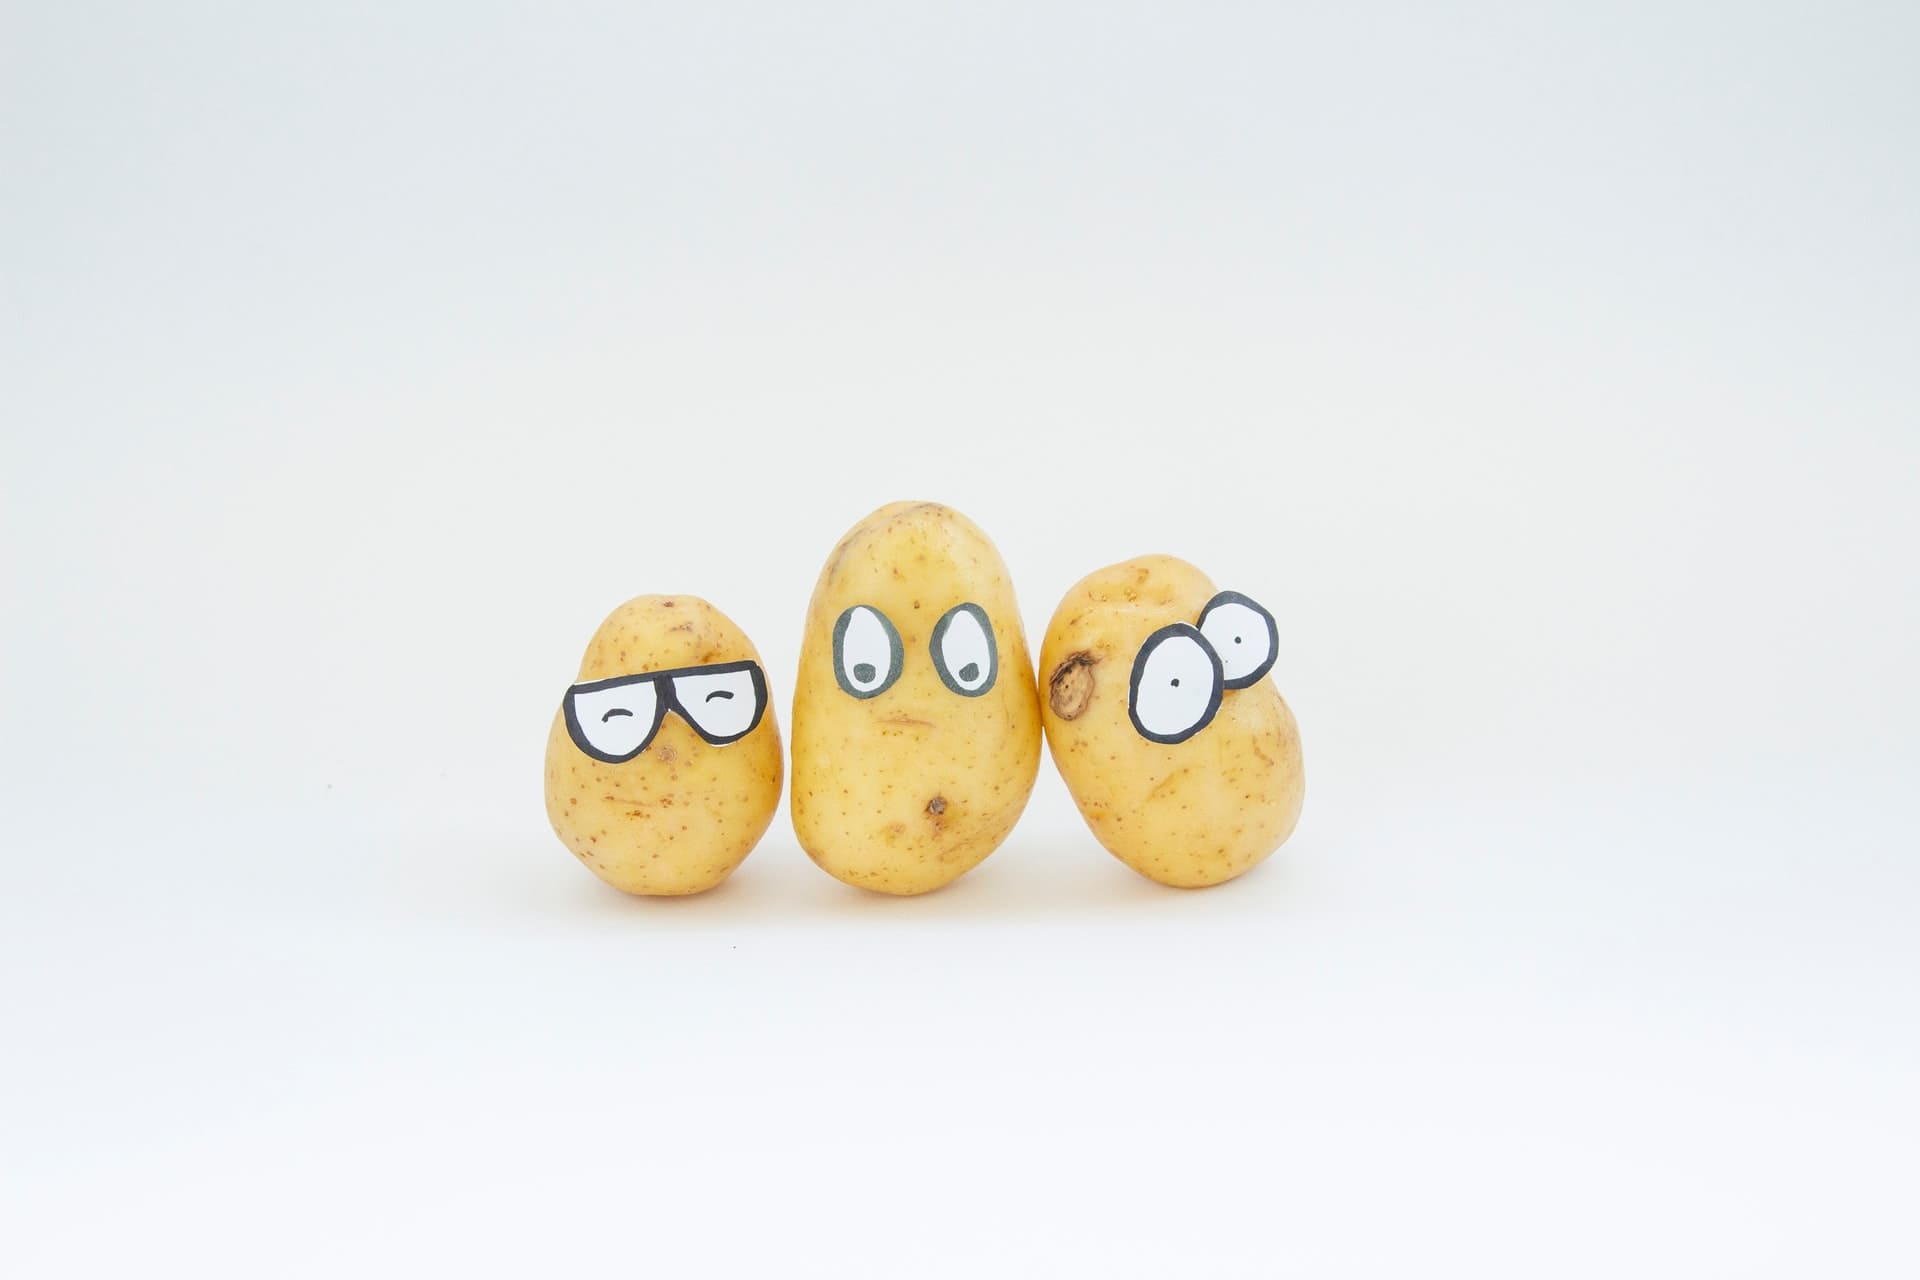 The Potato Diet - Everything Explained